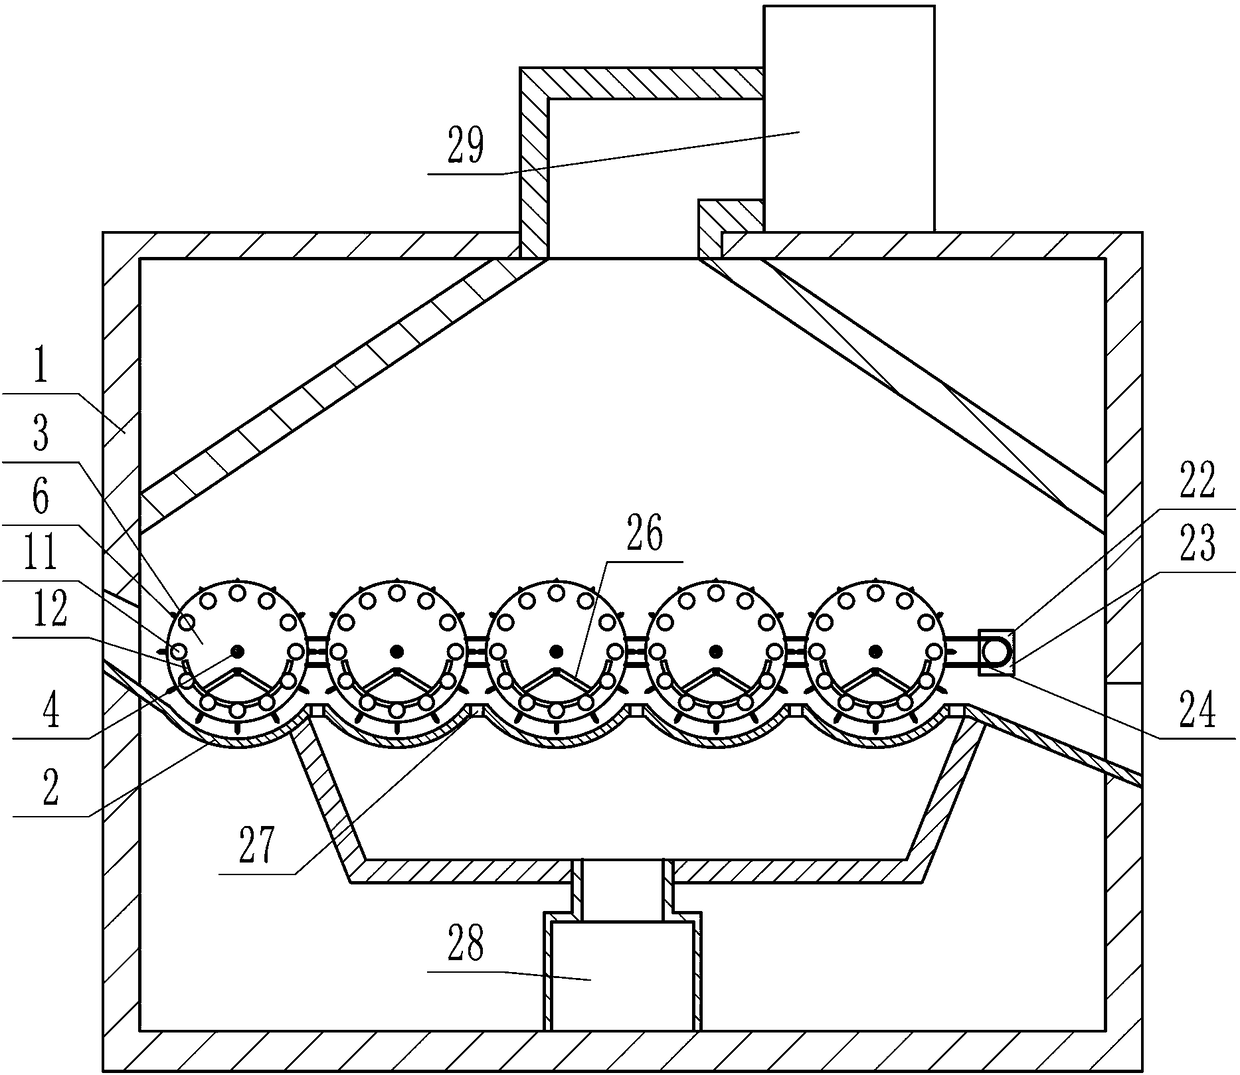 Blowing foreign fiber machine with function of spreading